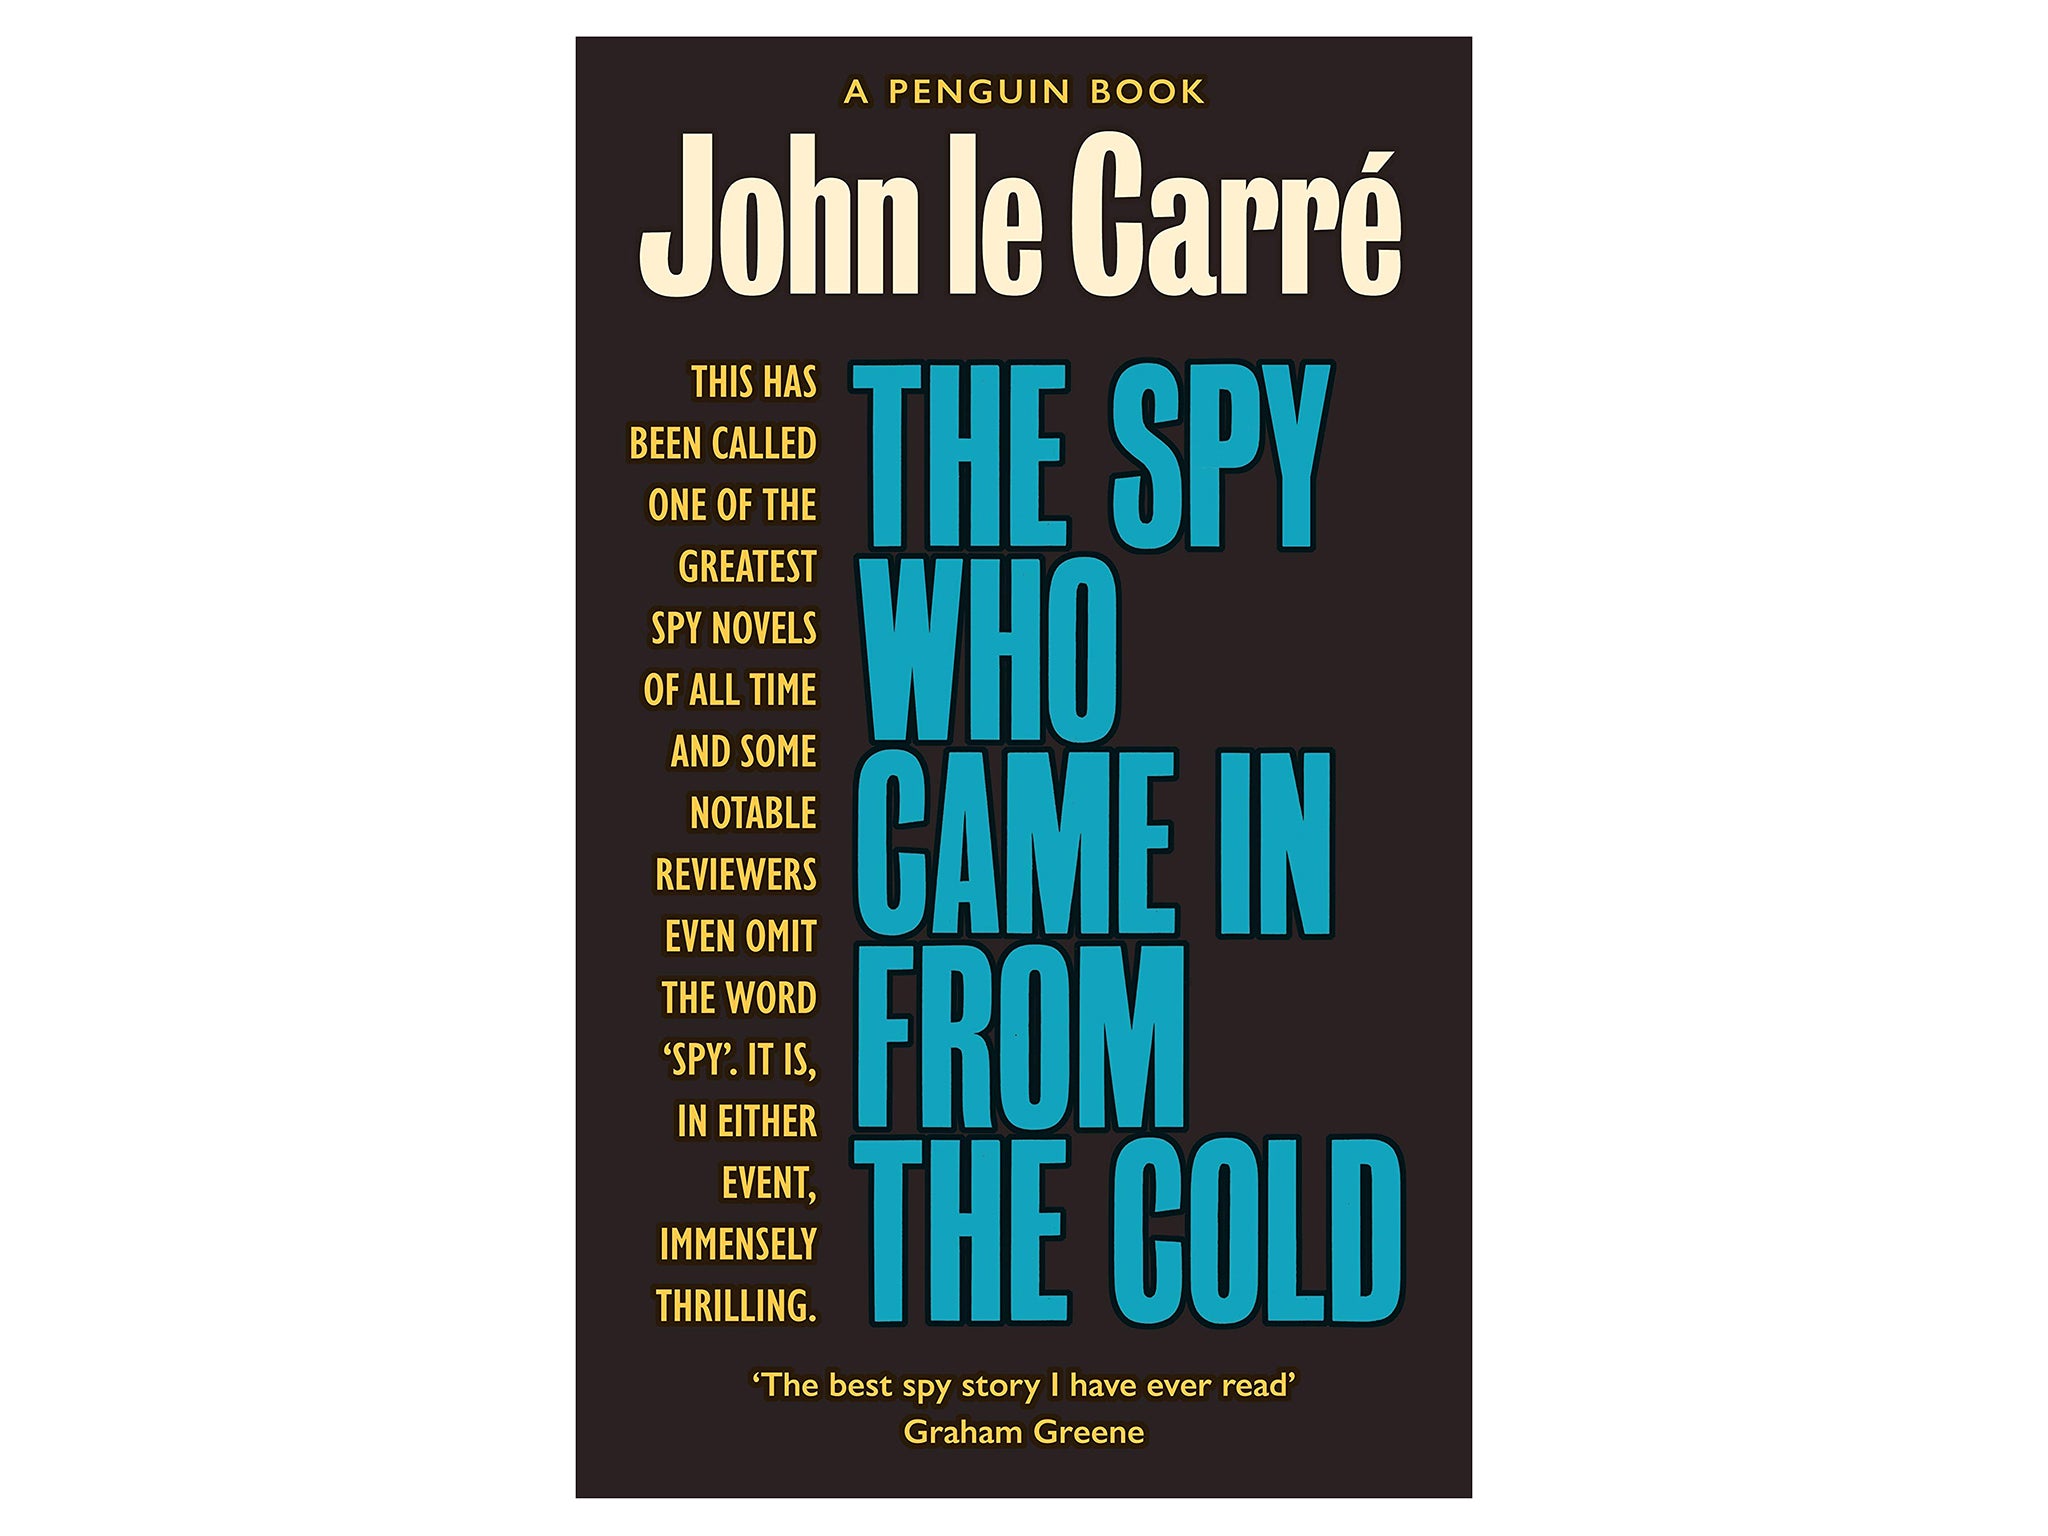 the-spy-who-came-in-from-the-cold-john-le-carre-indybest.jpg